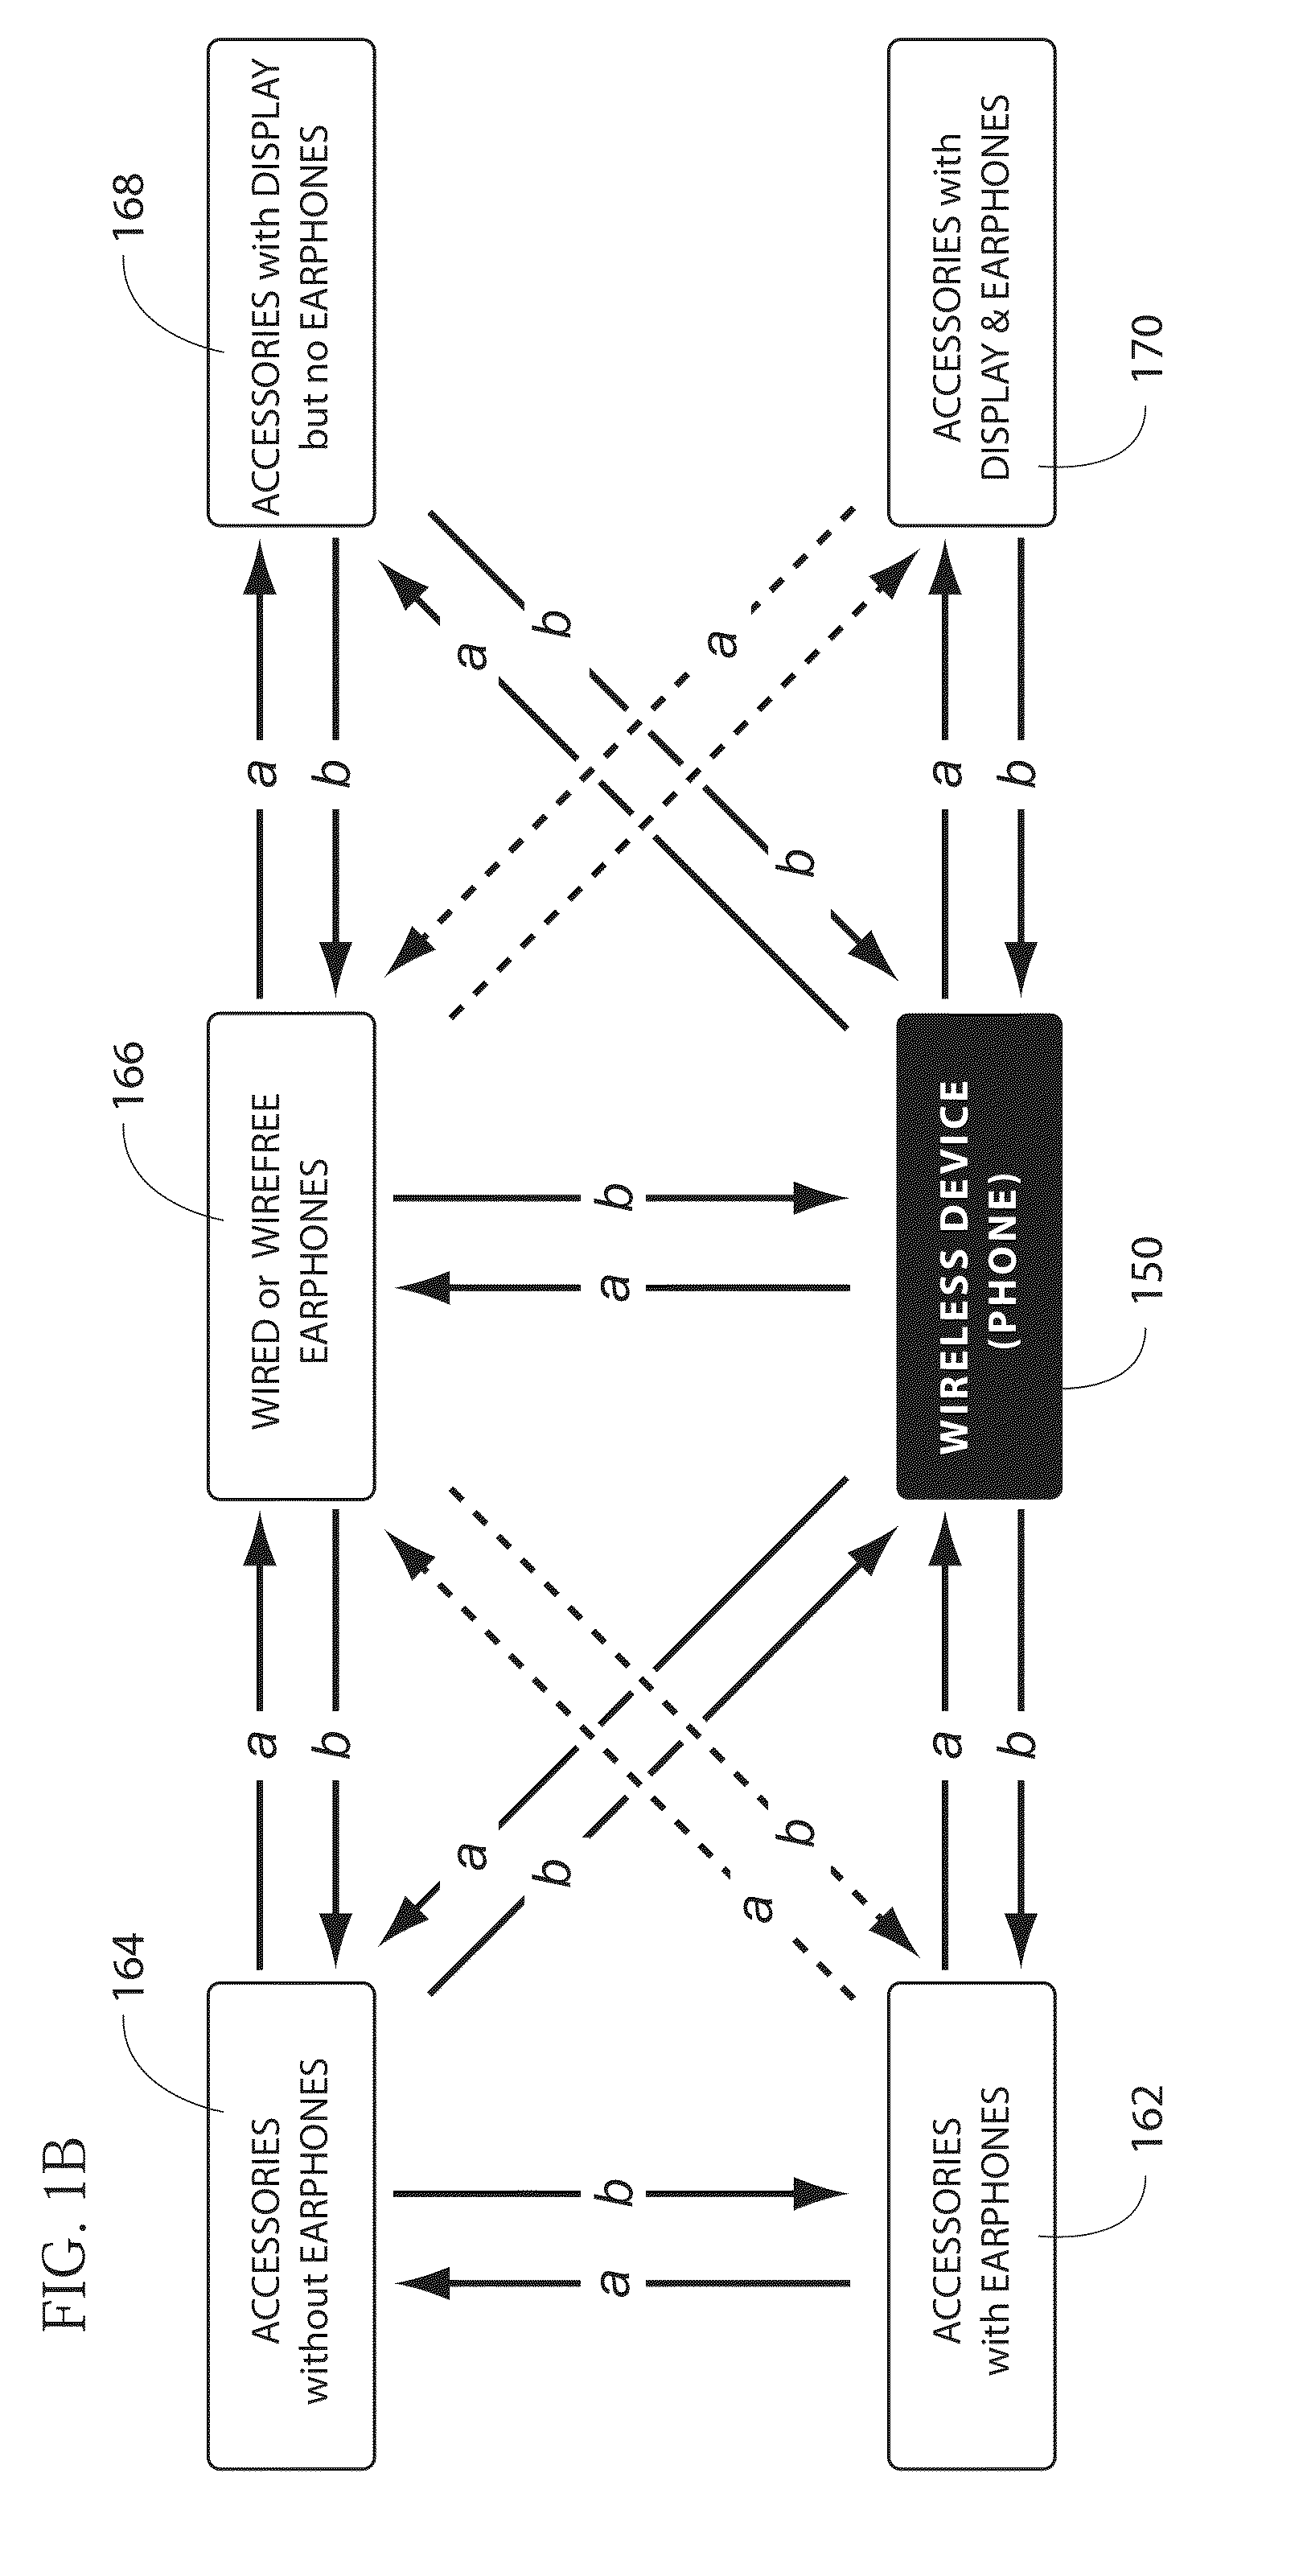 Methods, systems, and apparatuses for incorporating wireless headsets, terminals, and communication devices into fashion accessories and jewelry